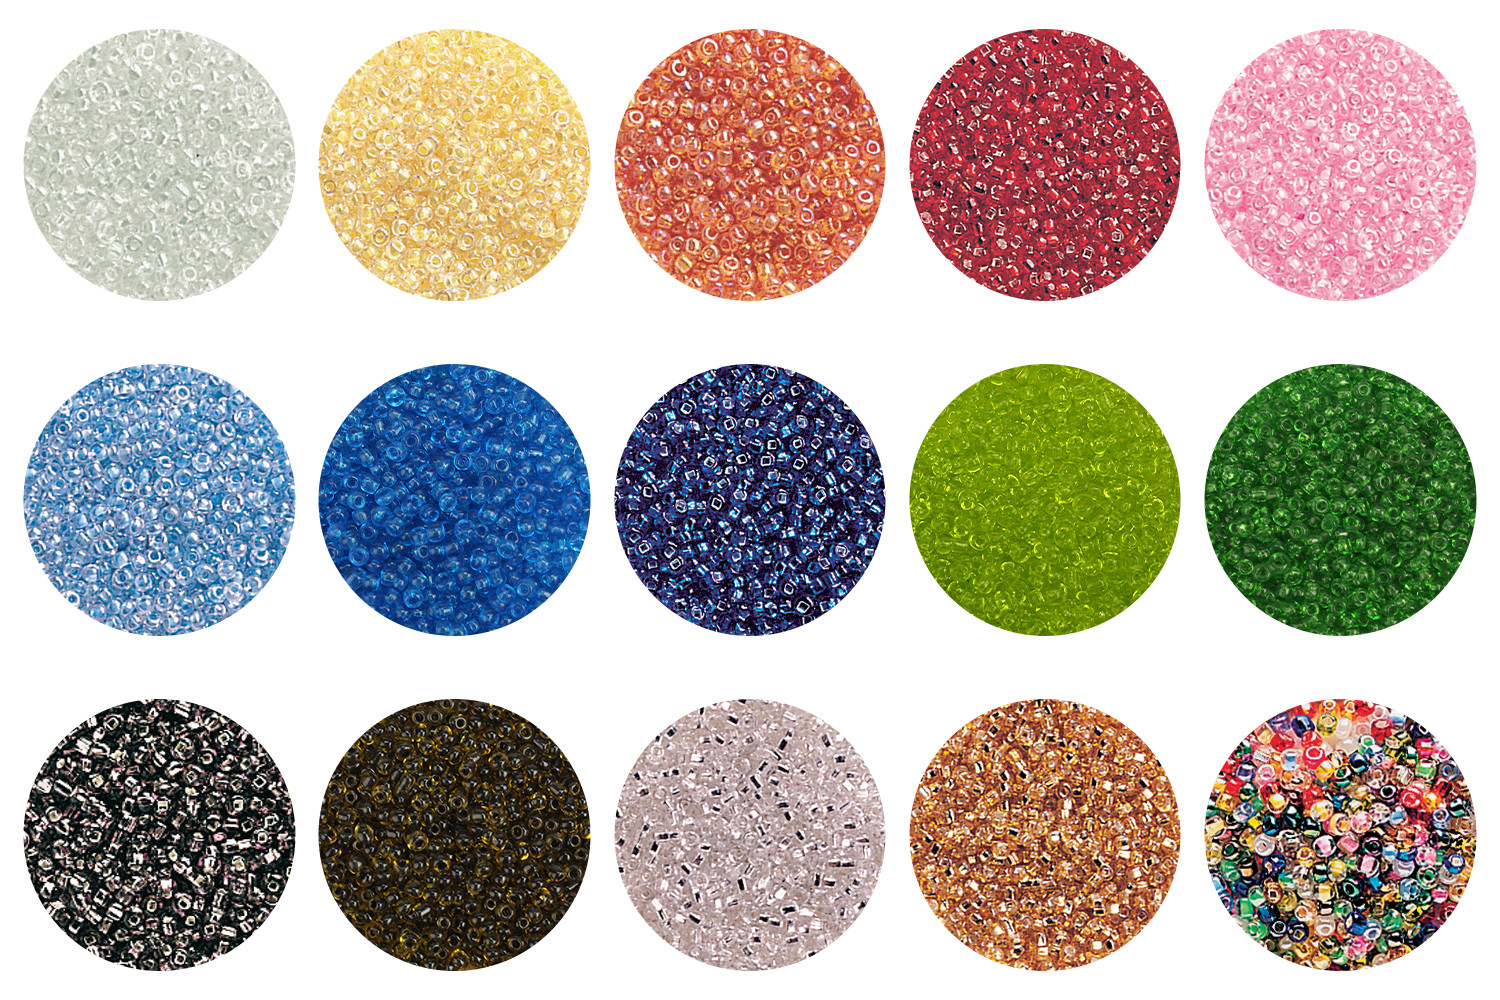 Seed beads: A small wonder for jewelry making Mamzelle Créations